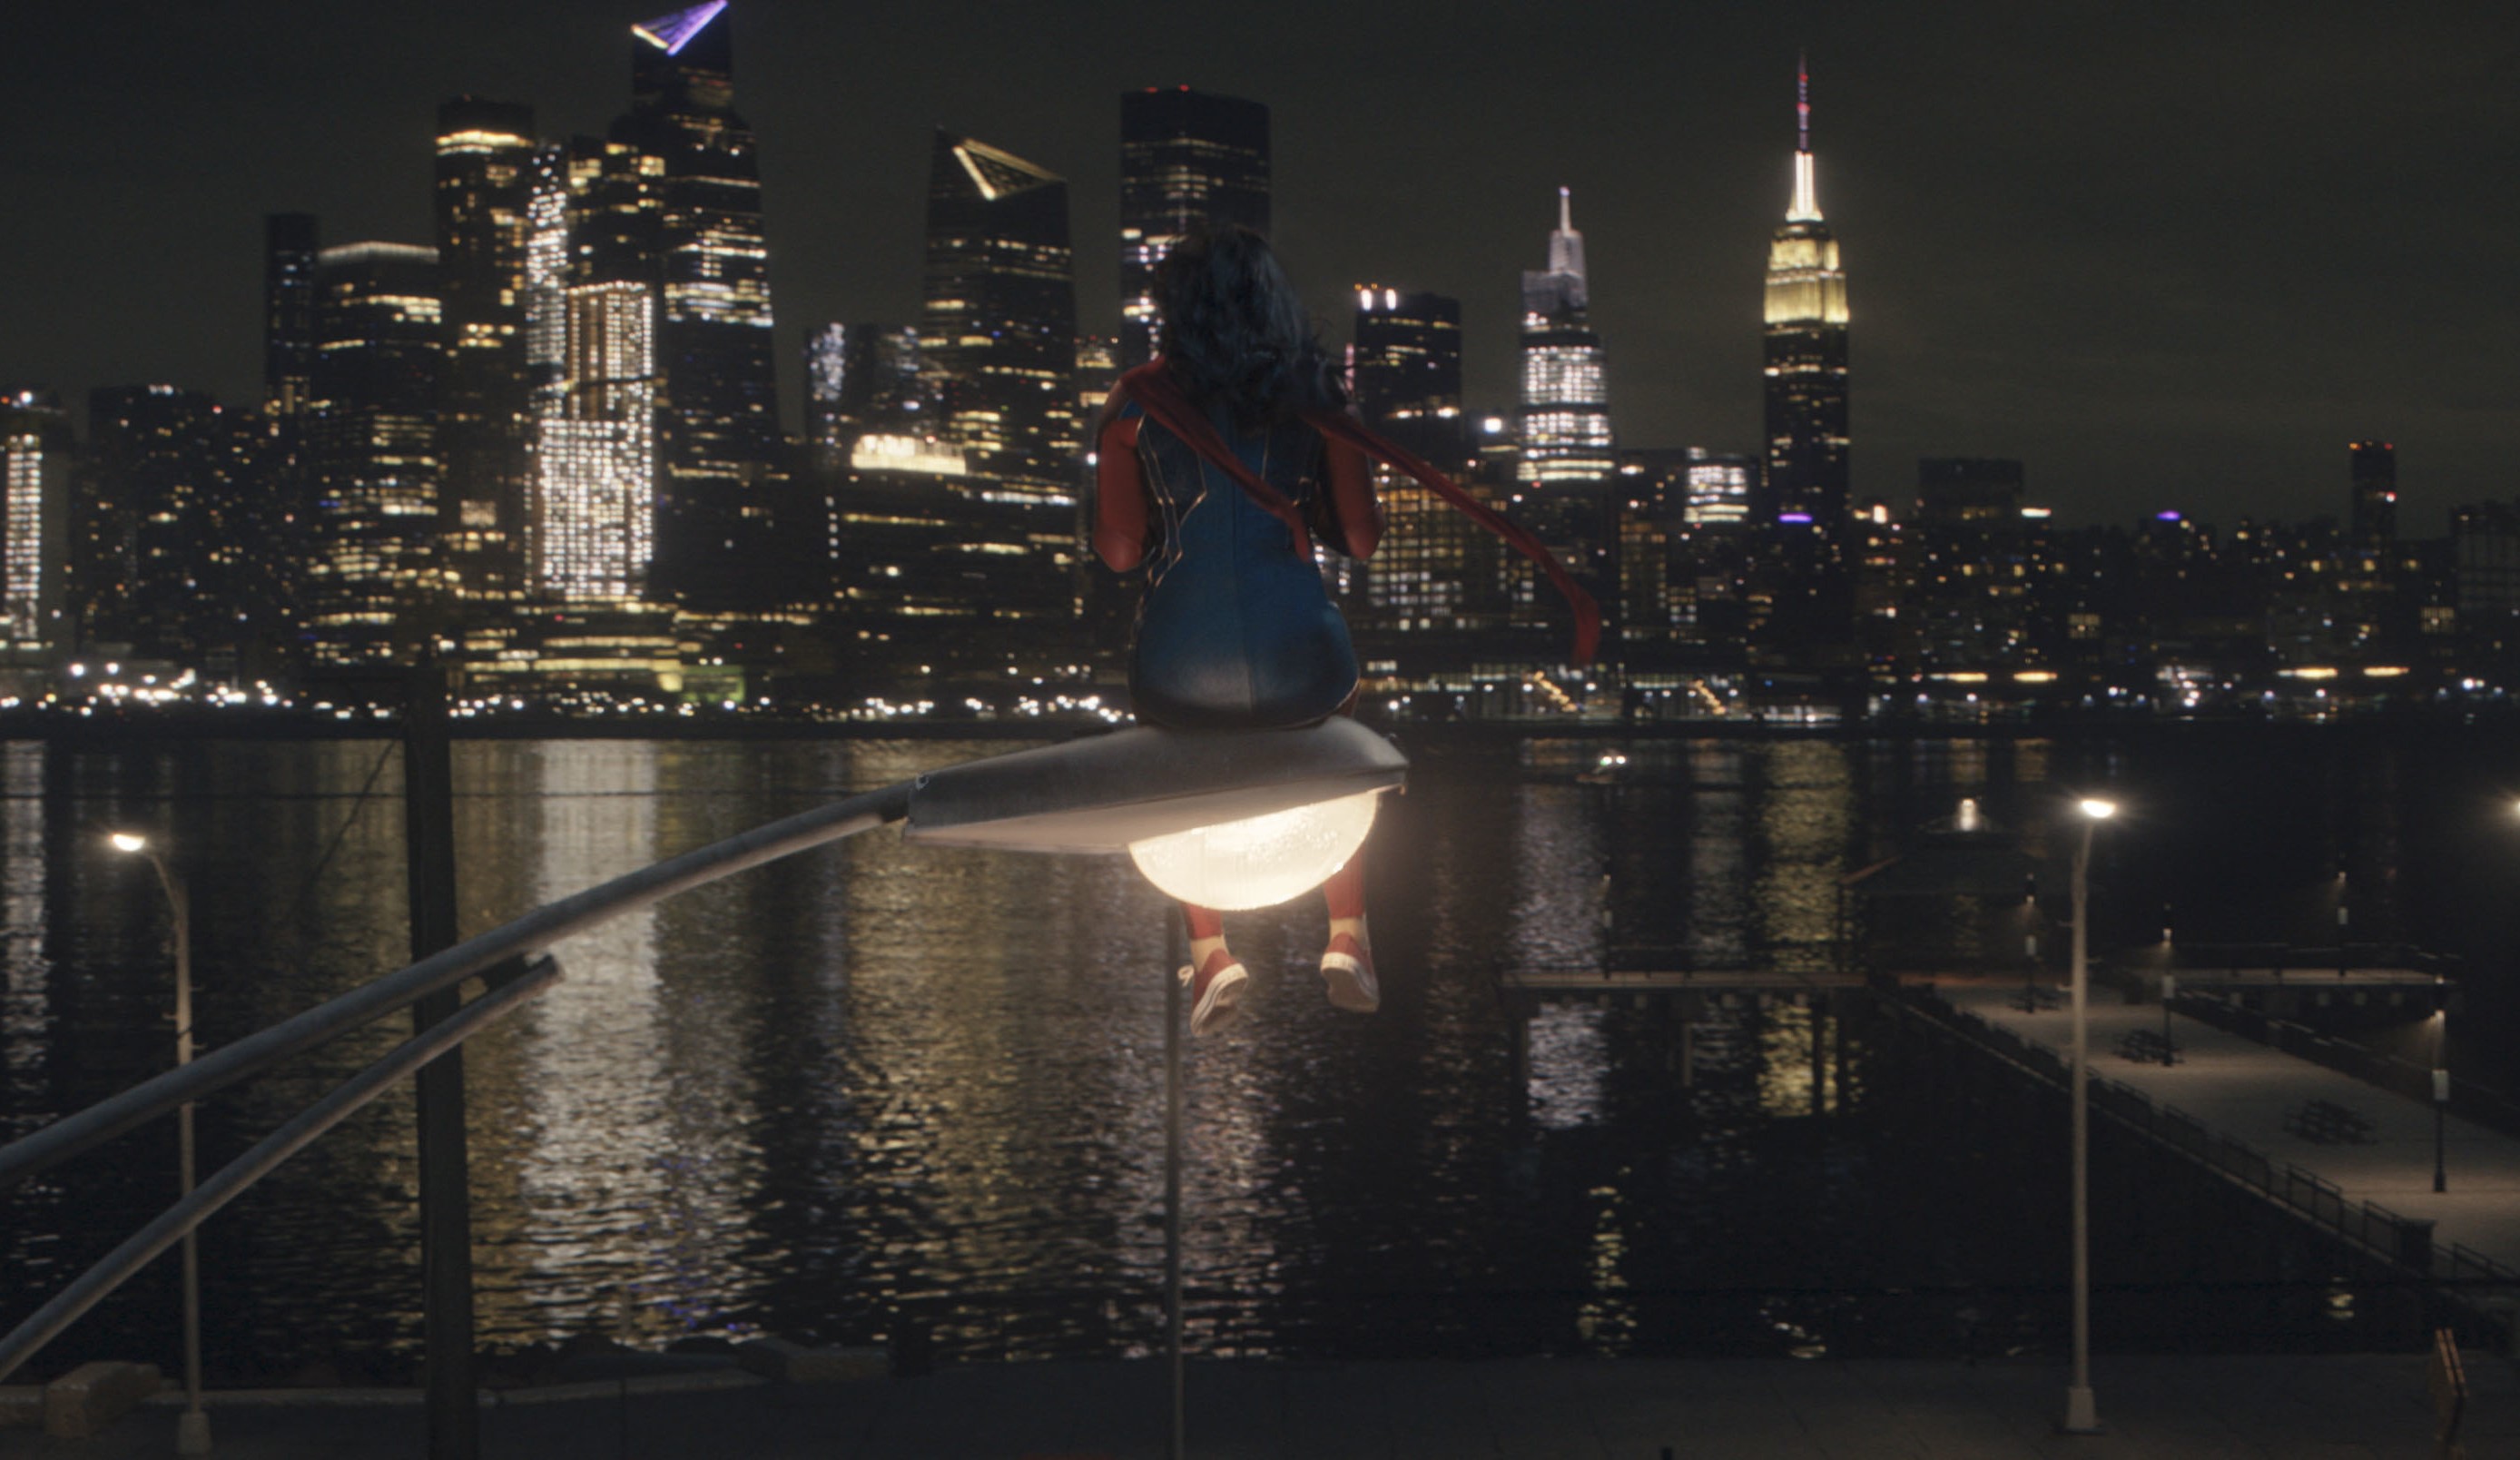 Iman Vellani as Kamala Khan in 'Ms. Marvel,' which streams its finale with episode 6. She's sitting on a street light and staring out at a city landscape.